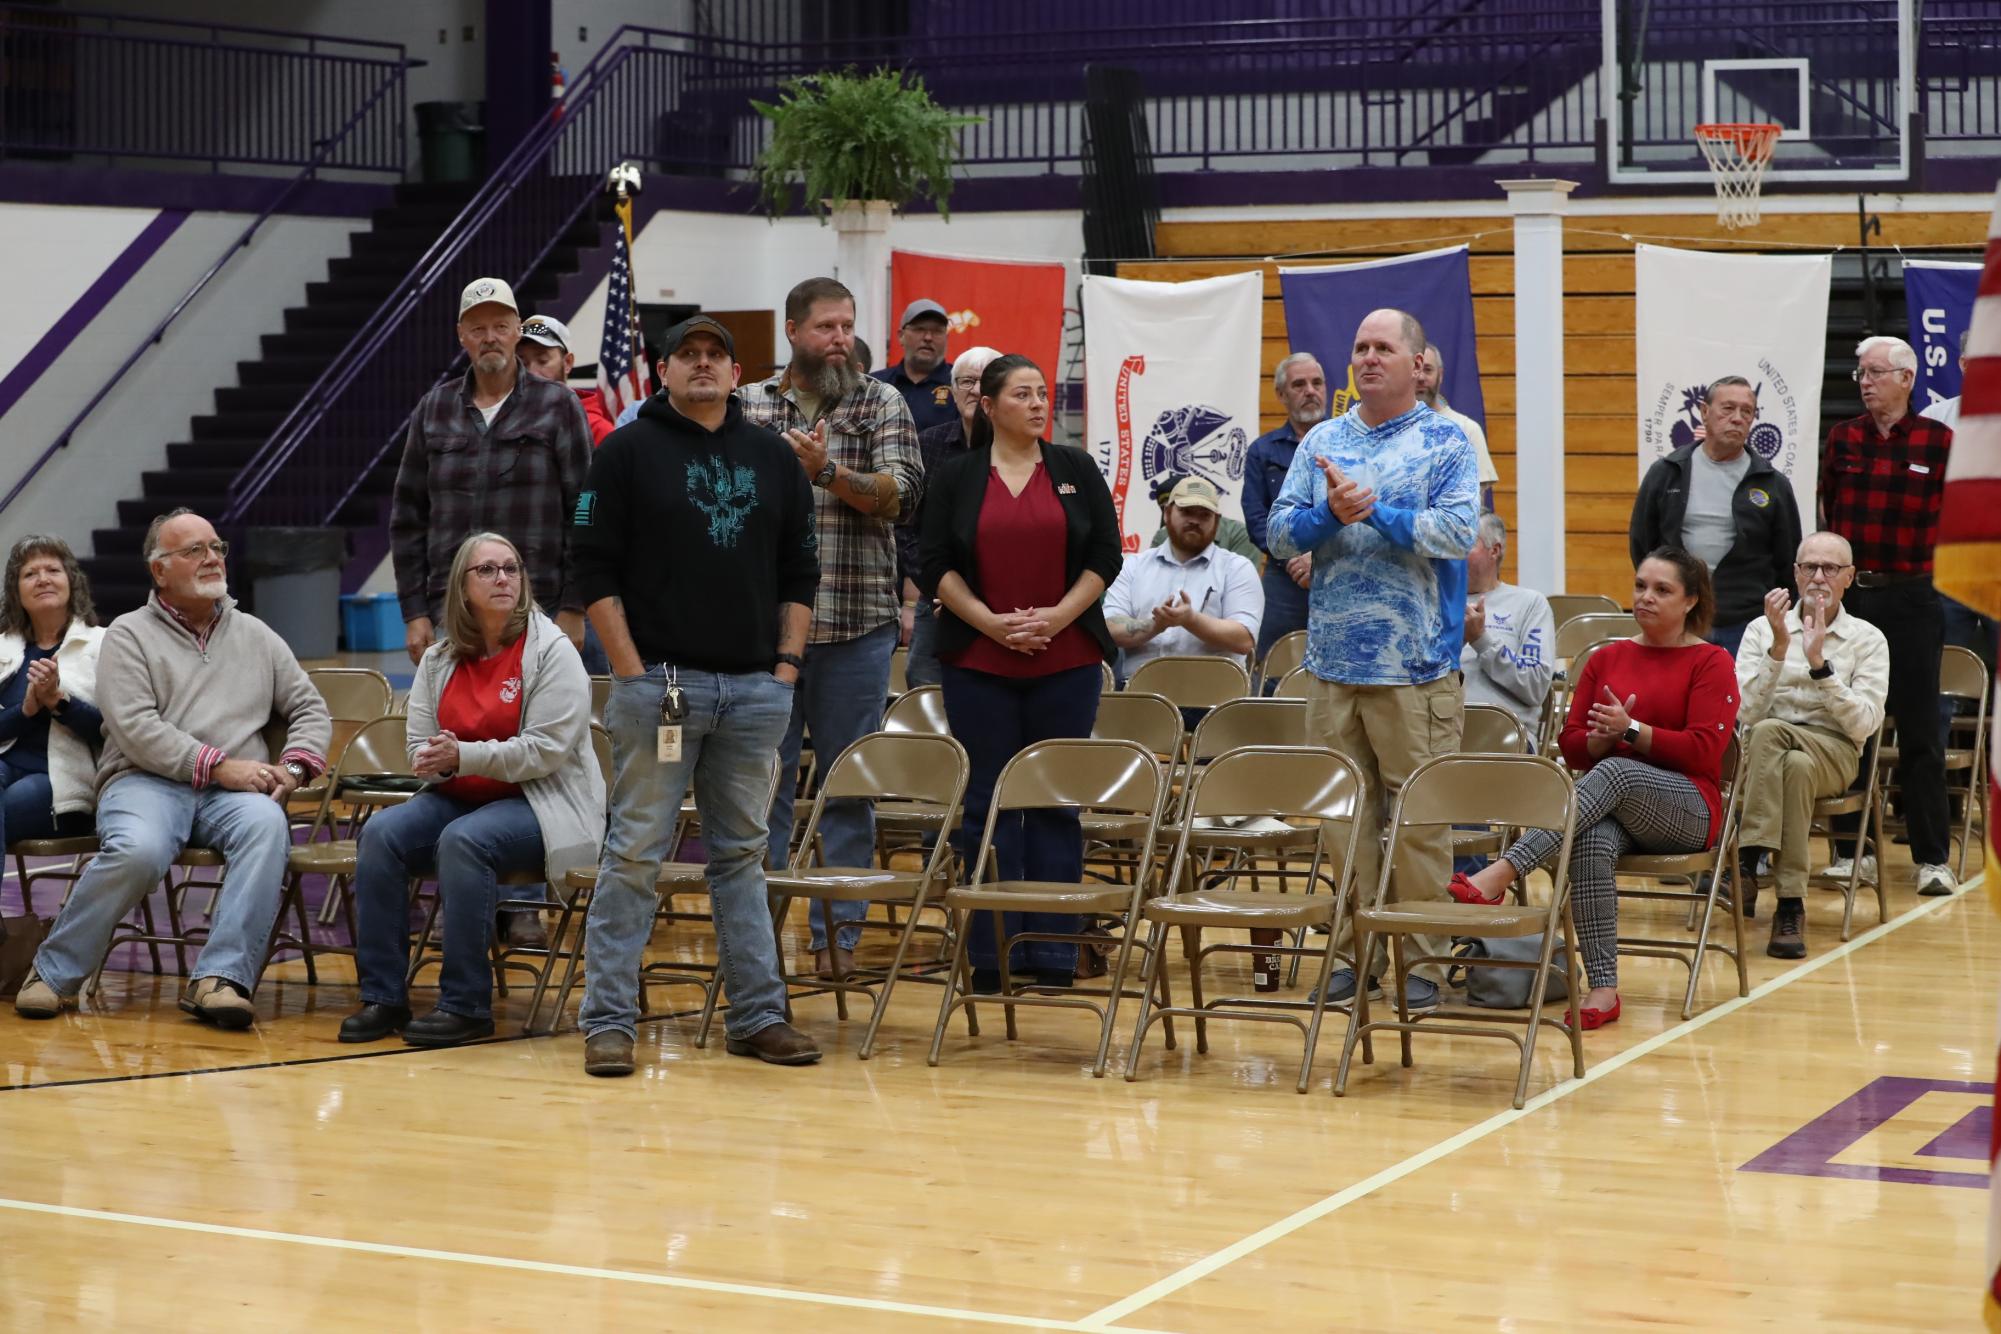 All the veterans who attended the program standing for the pledge